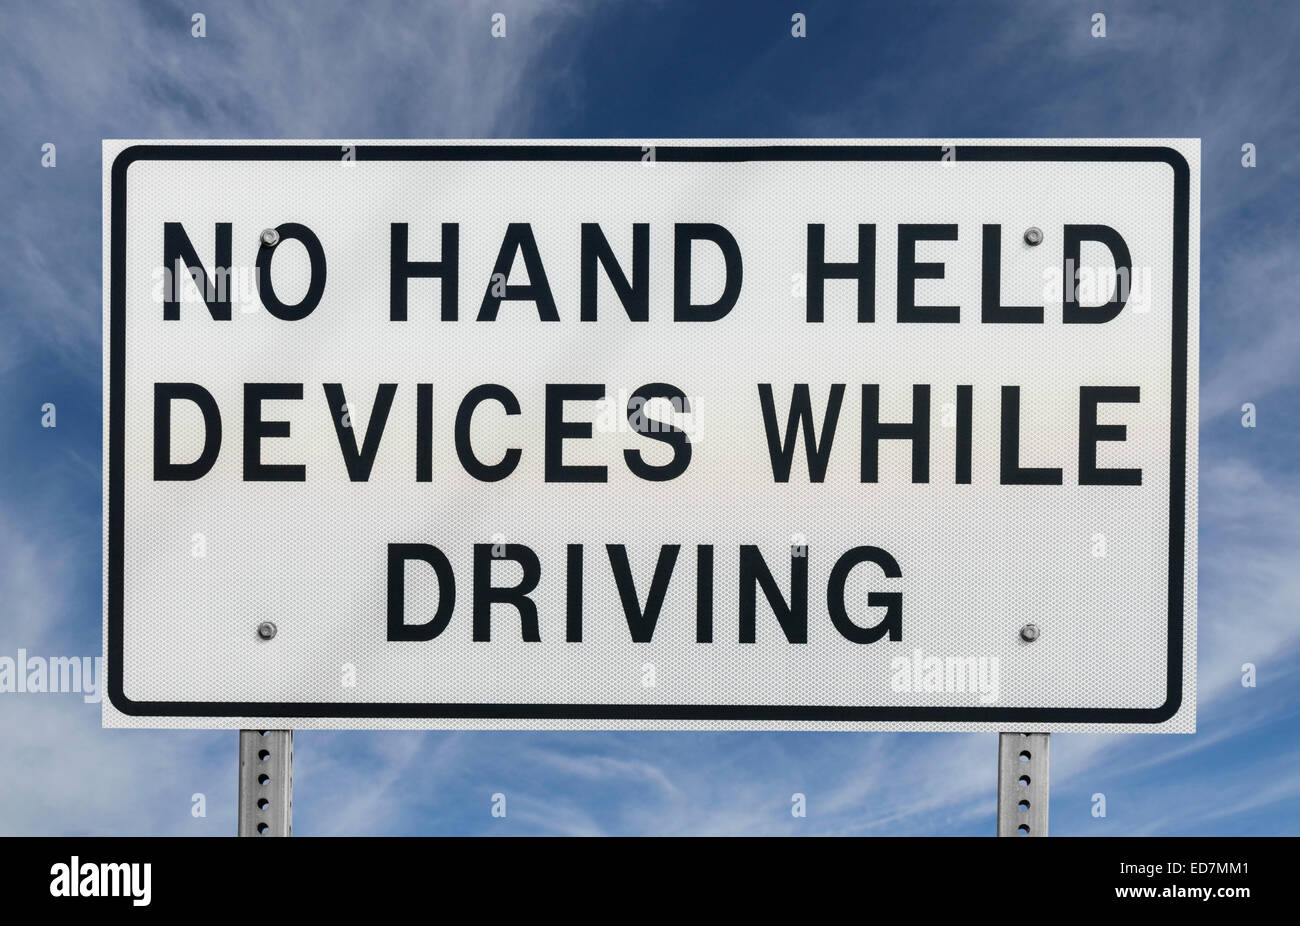 No hand held devices while driving sign. Stock Photo